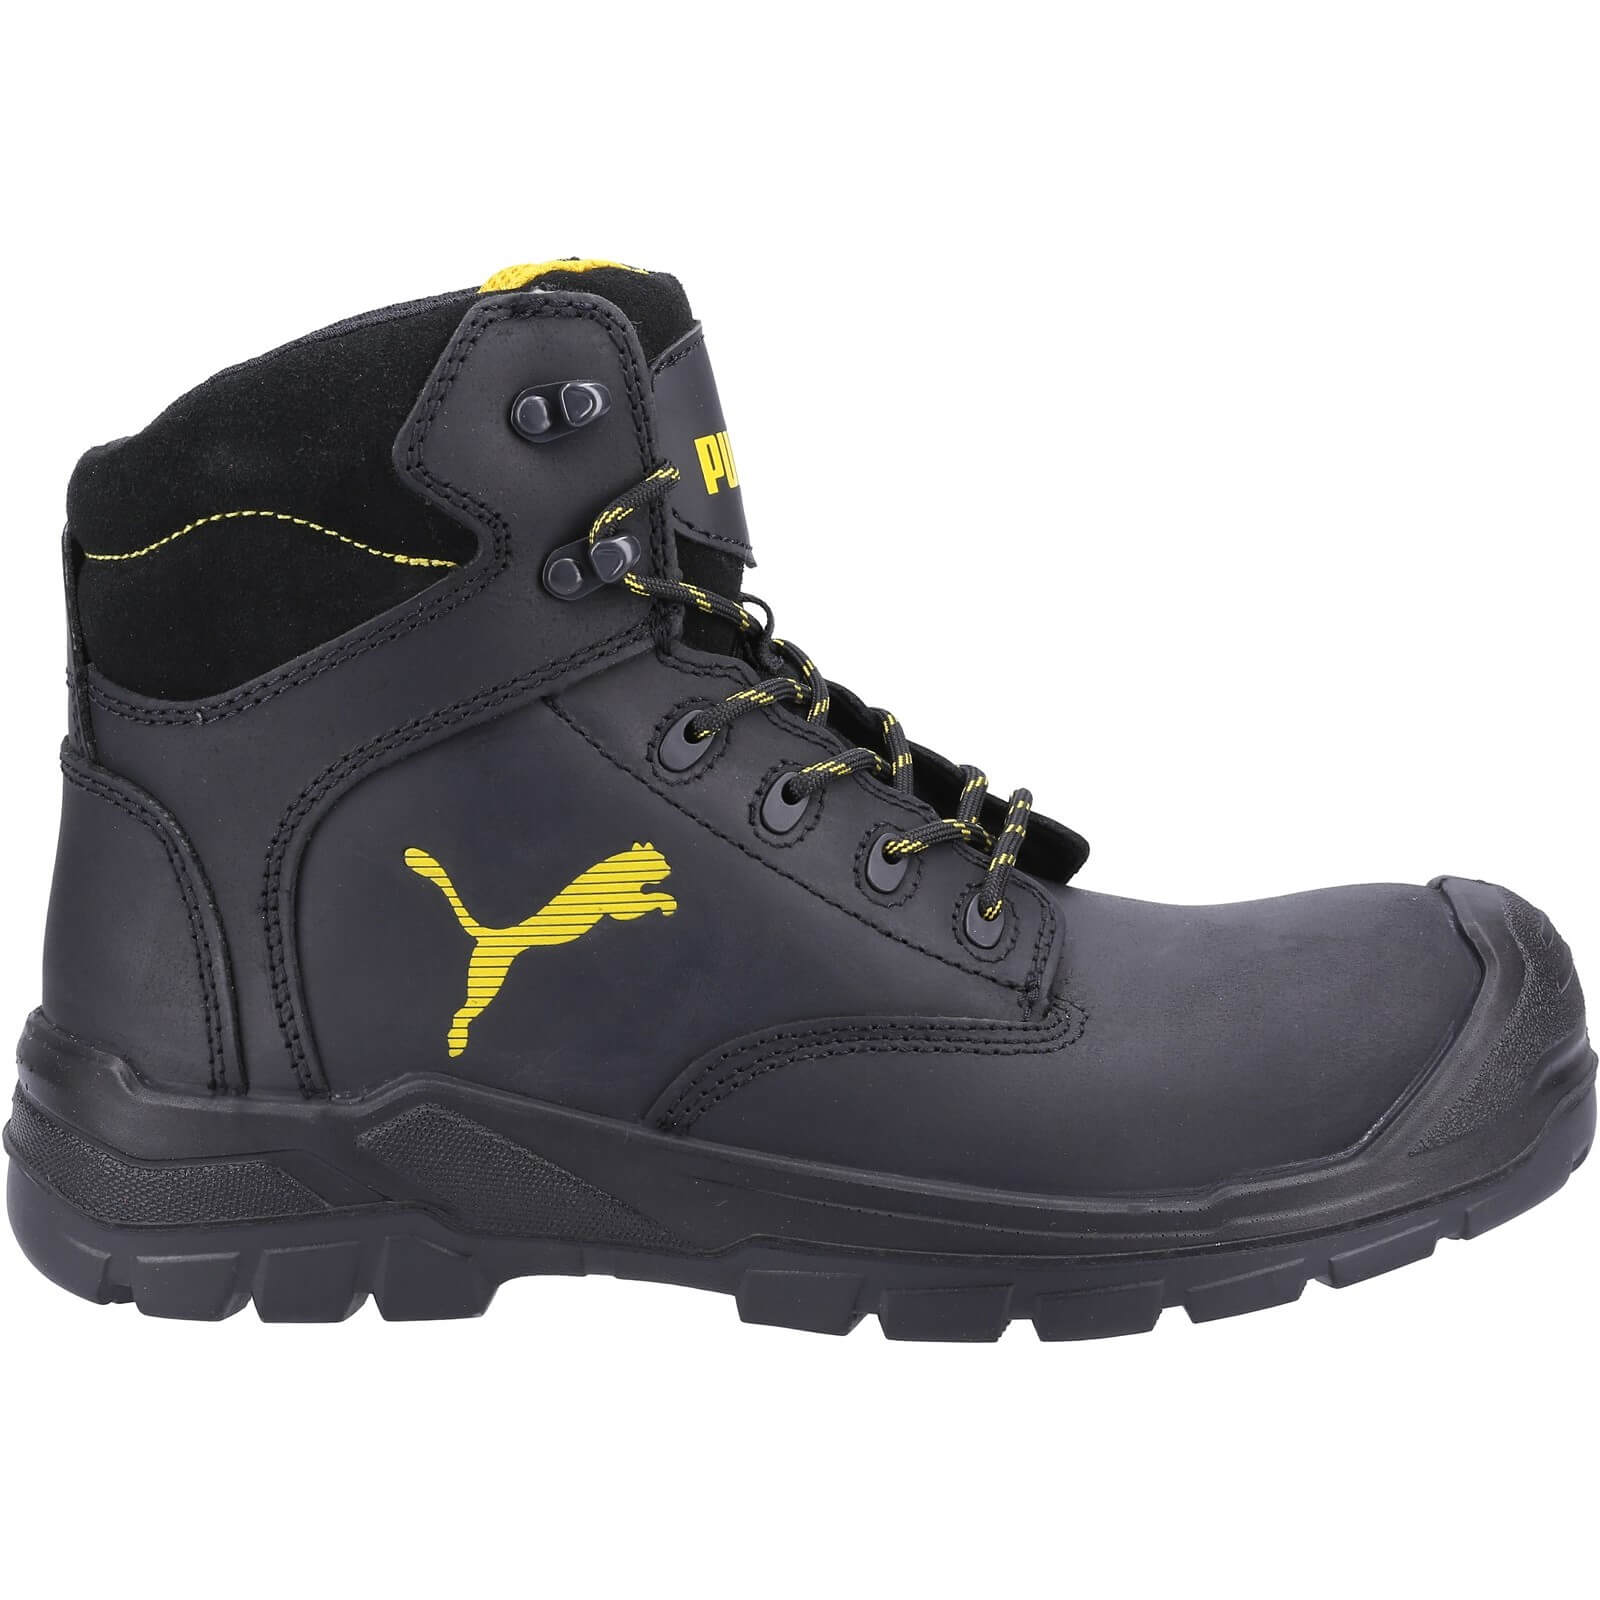 Puma Safety Borneo Mid Safety Boots – S3